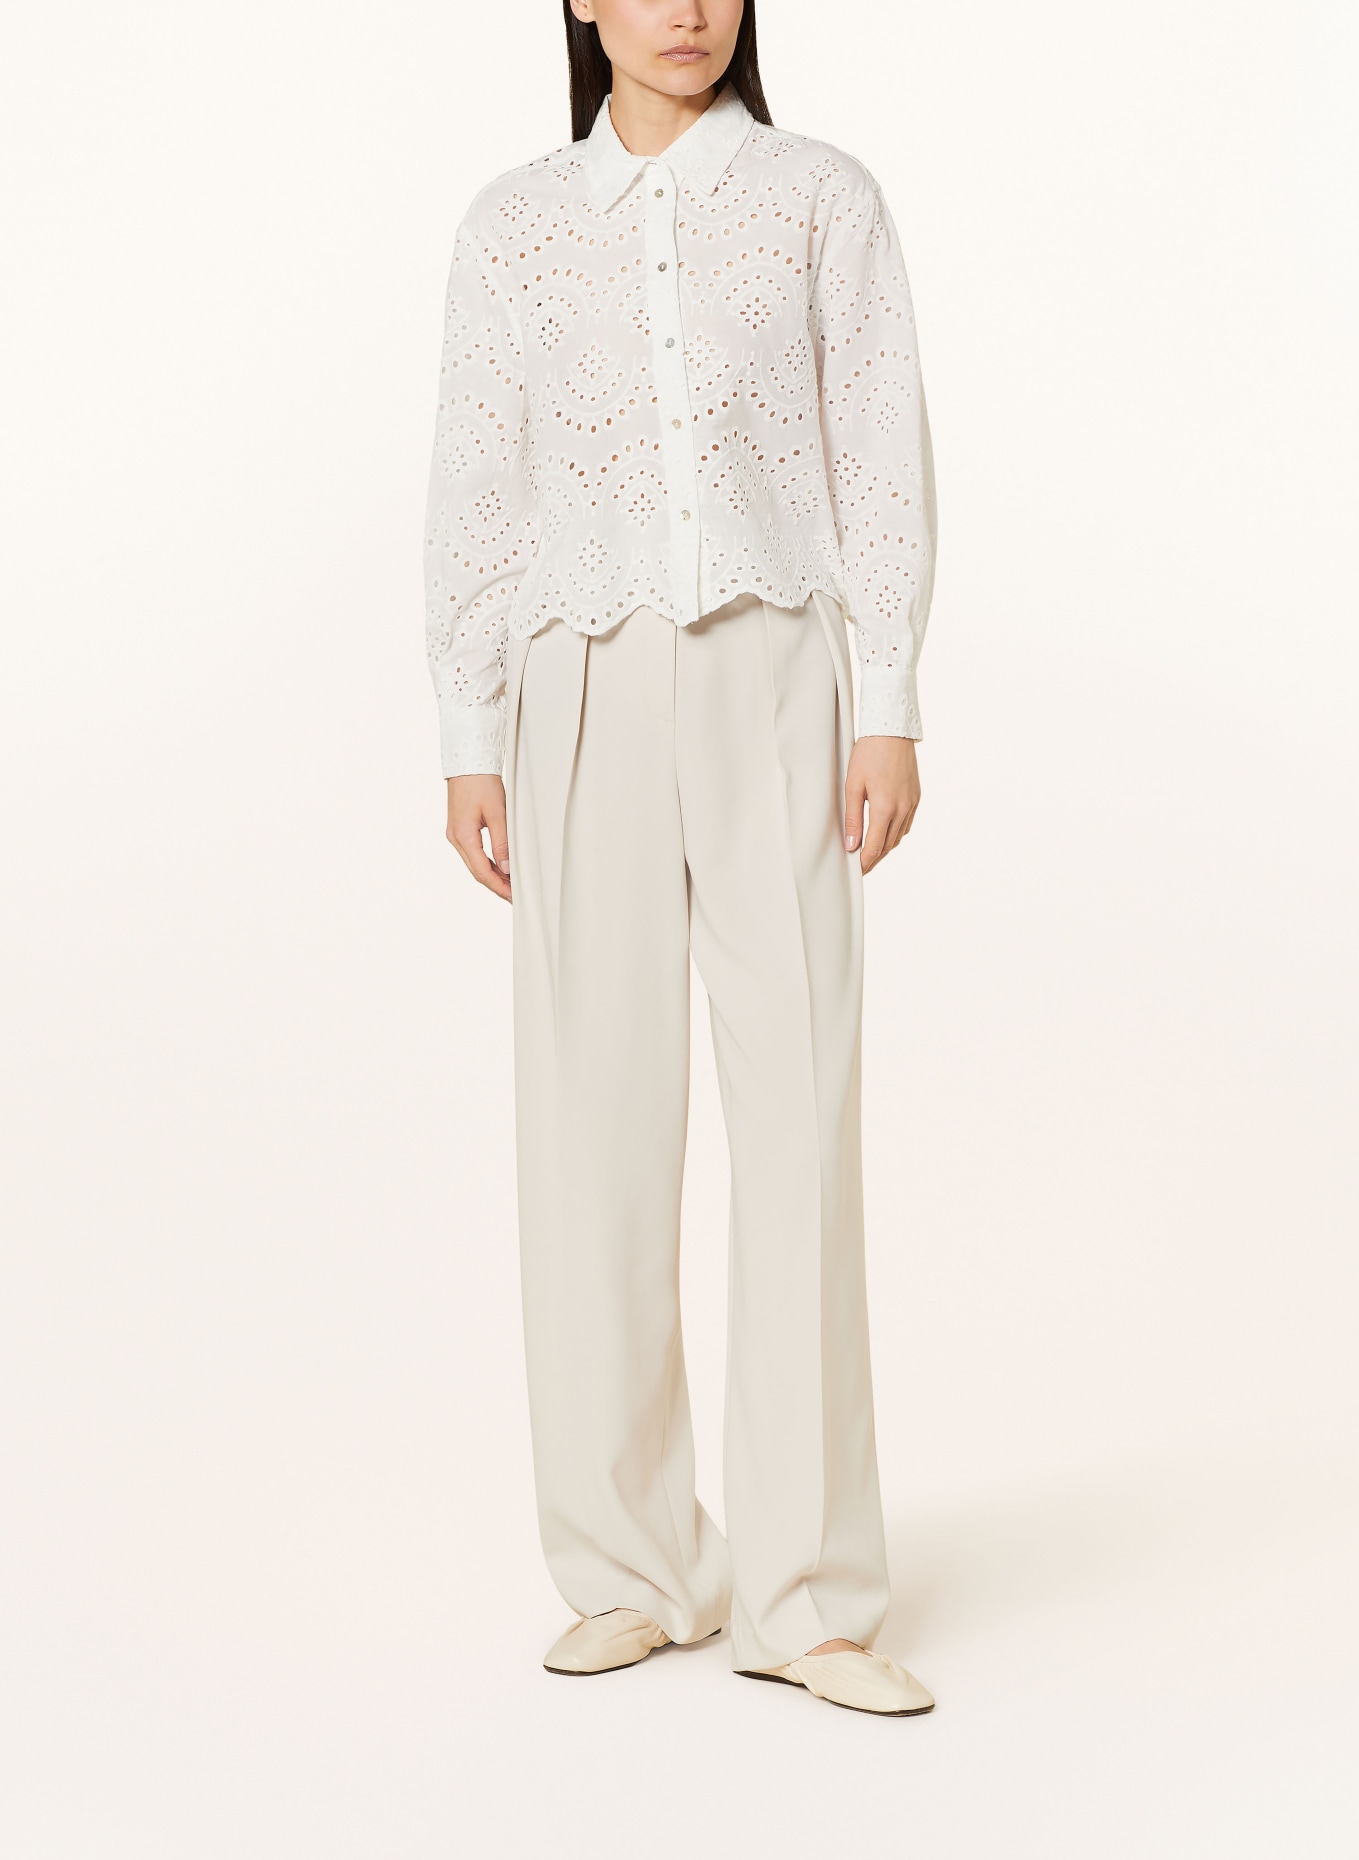 ONLY Shirt blouse with broderie anglaise, Color: ECRU (Image 2)